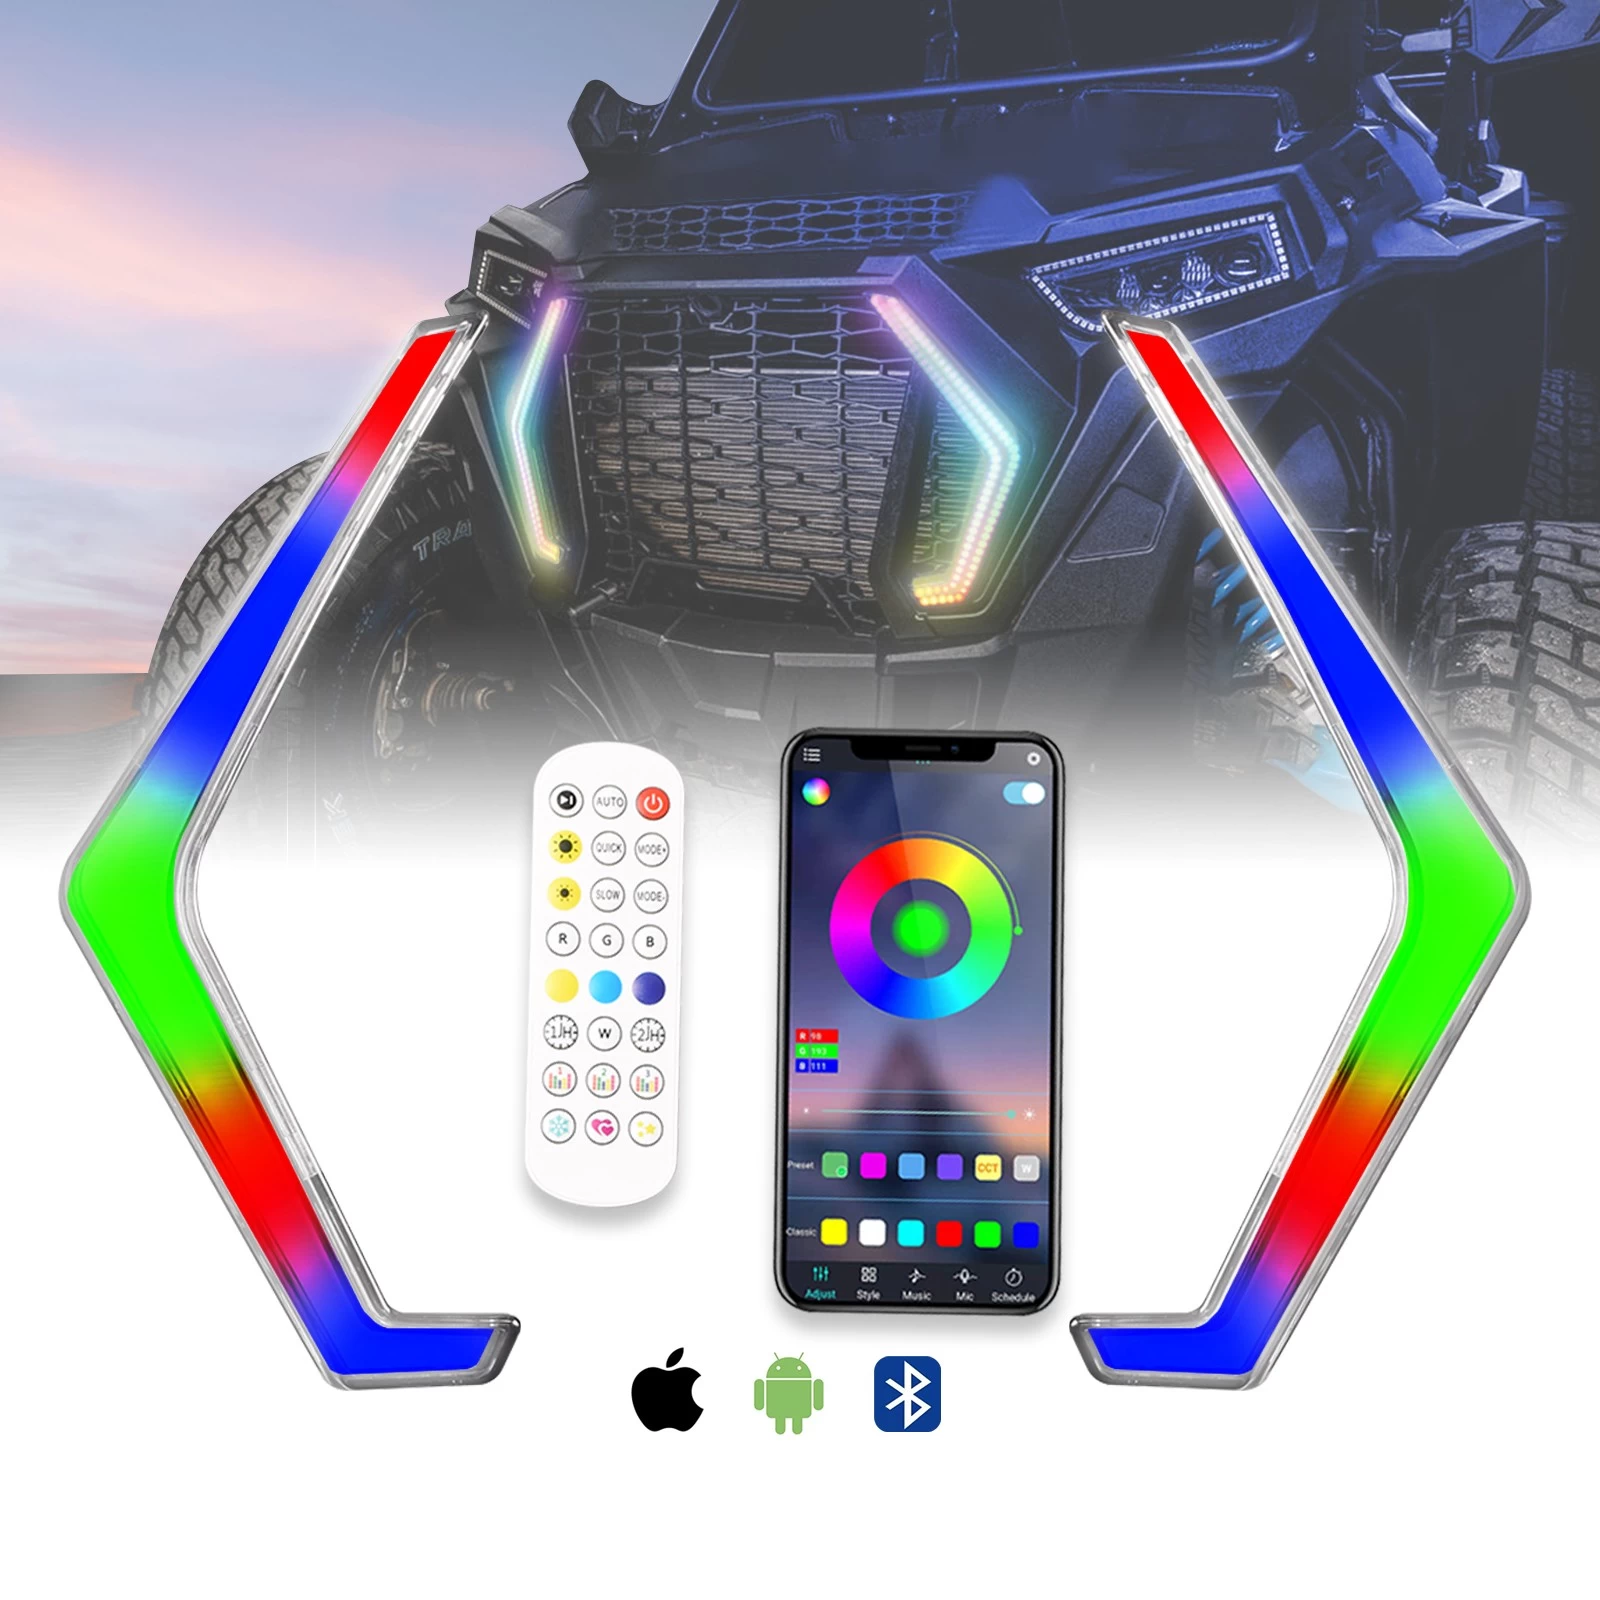 Китай Unionlux RZR Turn Signal Fang Lights , LED Turn Signal light with Chasing Color ,Remote Control, Front Signature Accent Fang Light Assembly for Polaris RZR XP 1000 Turbo 2019 2020 2021 производителя